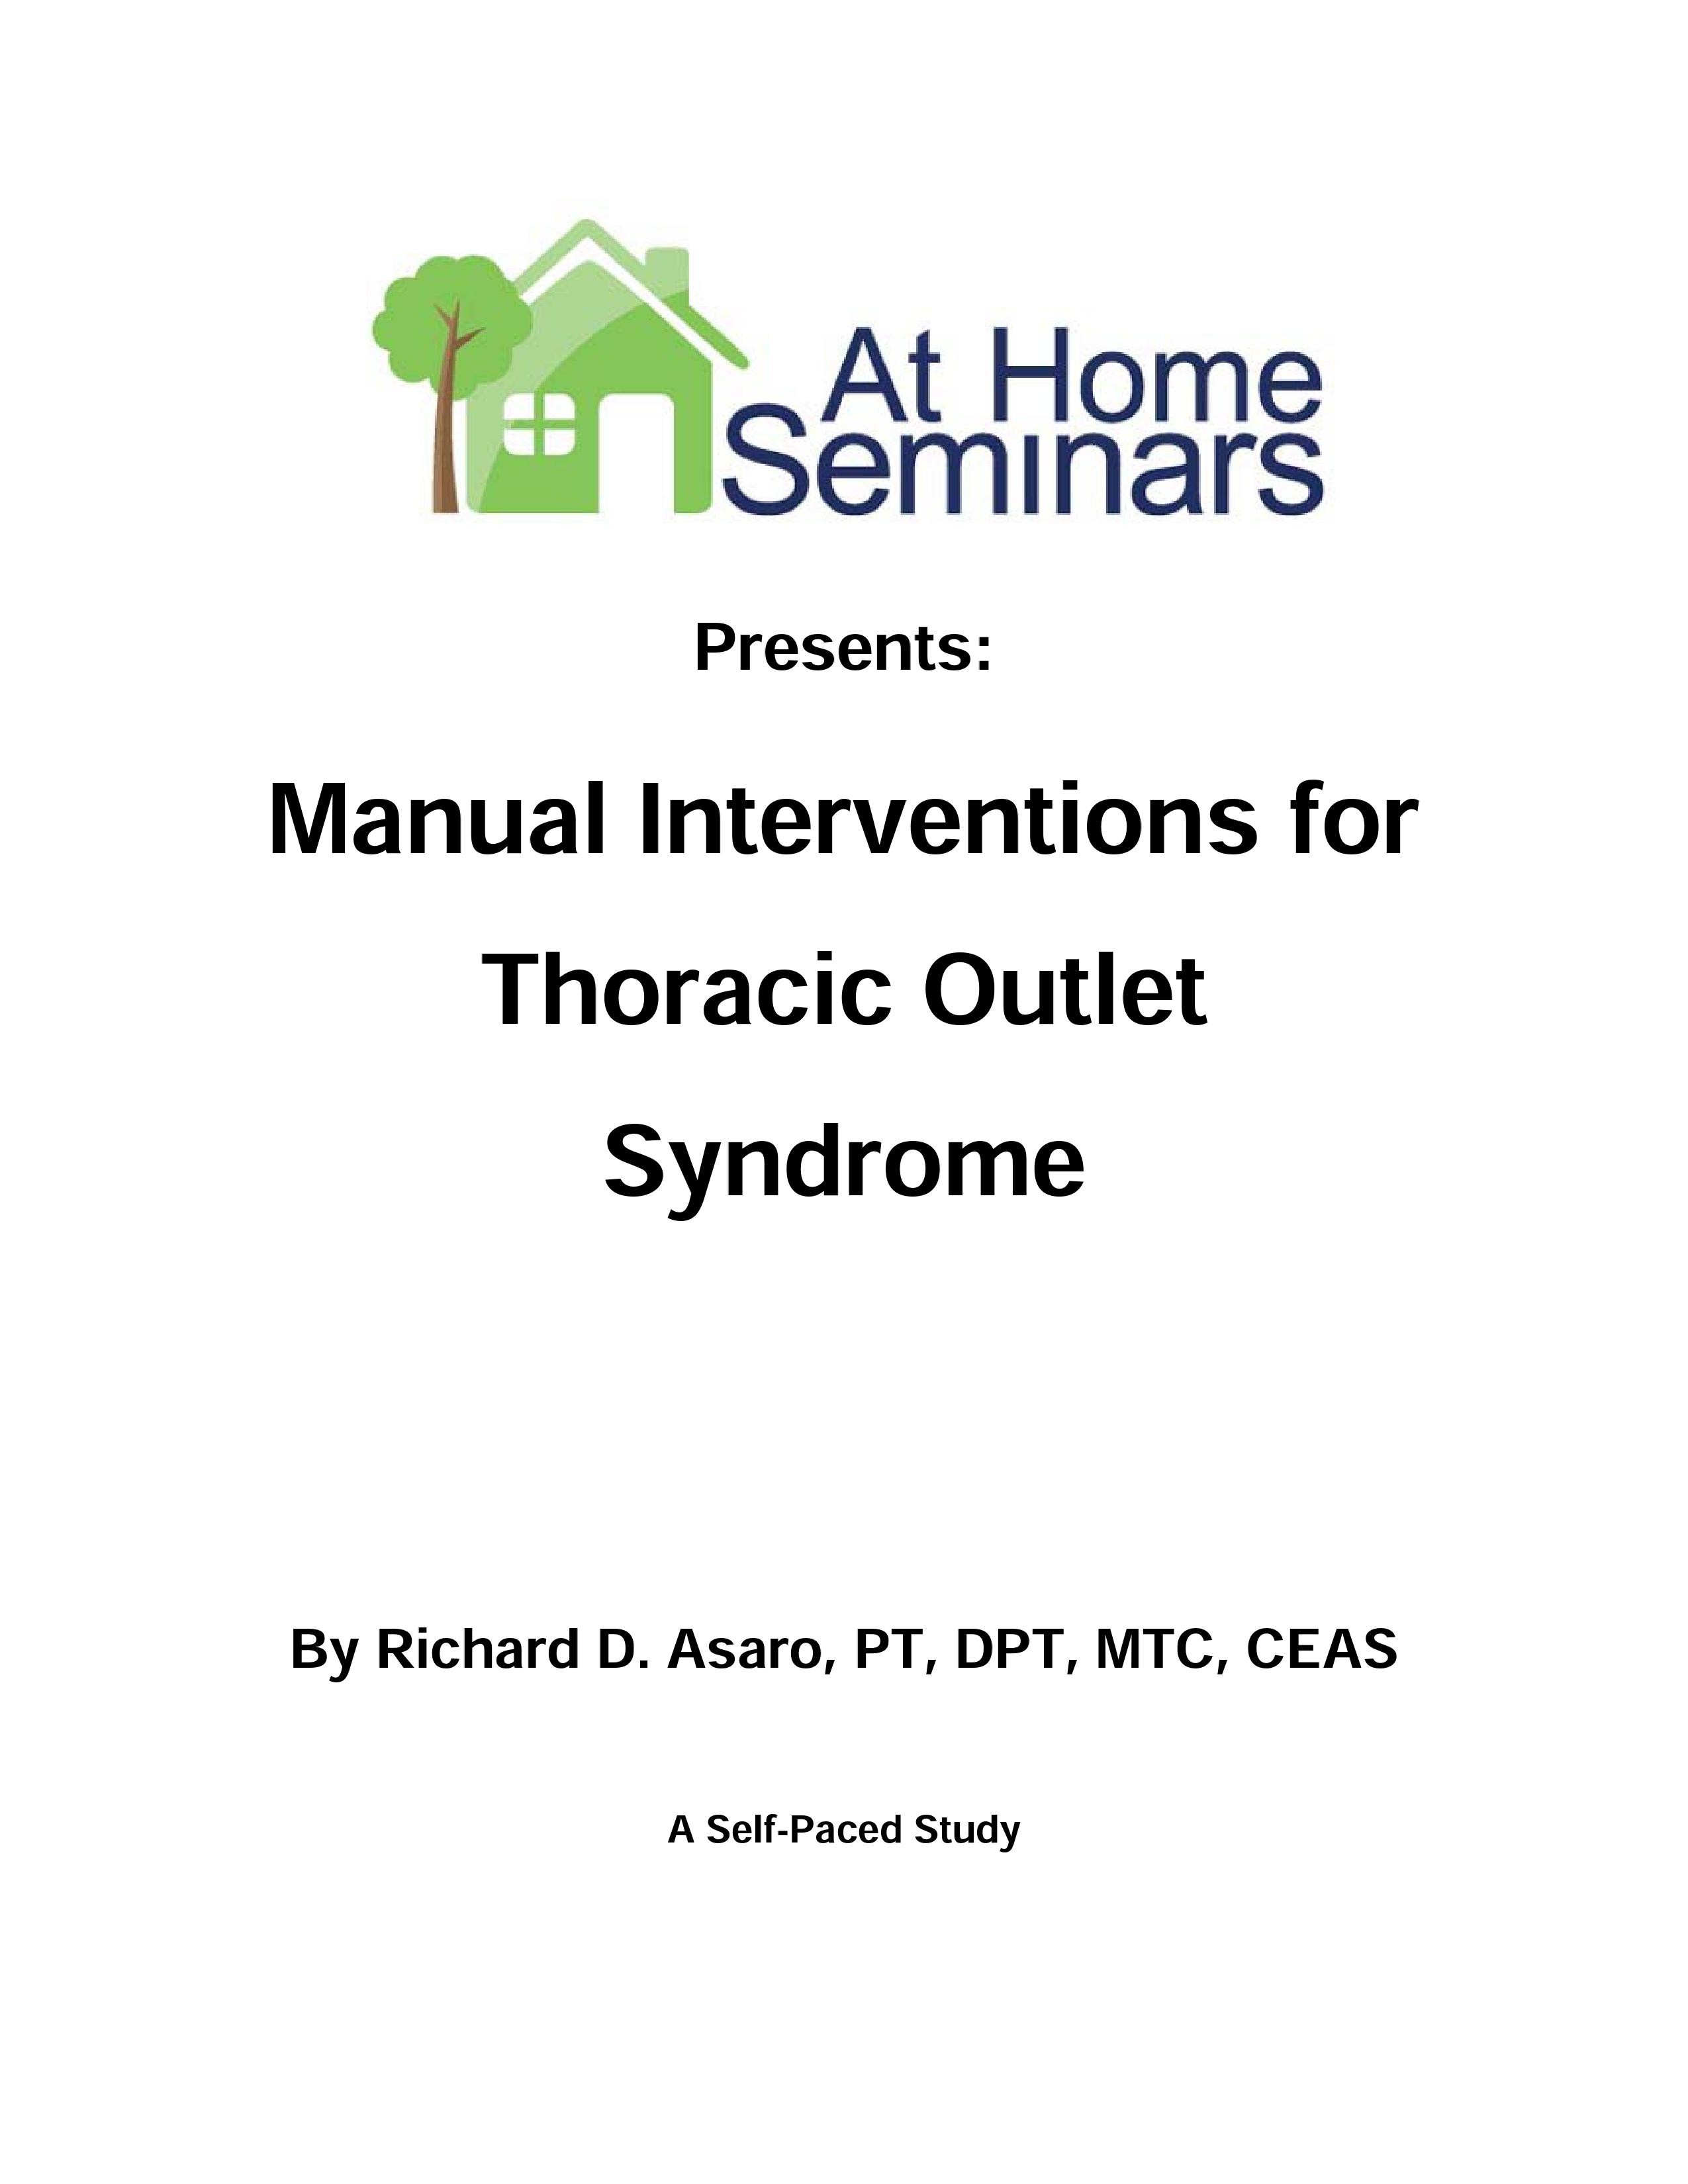 Manual Interventions for Thoracic Outlet Syndrome (Electronic Download)